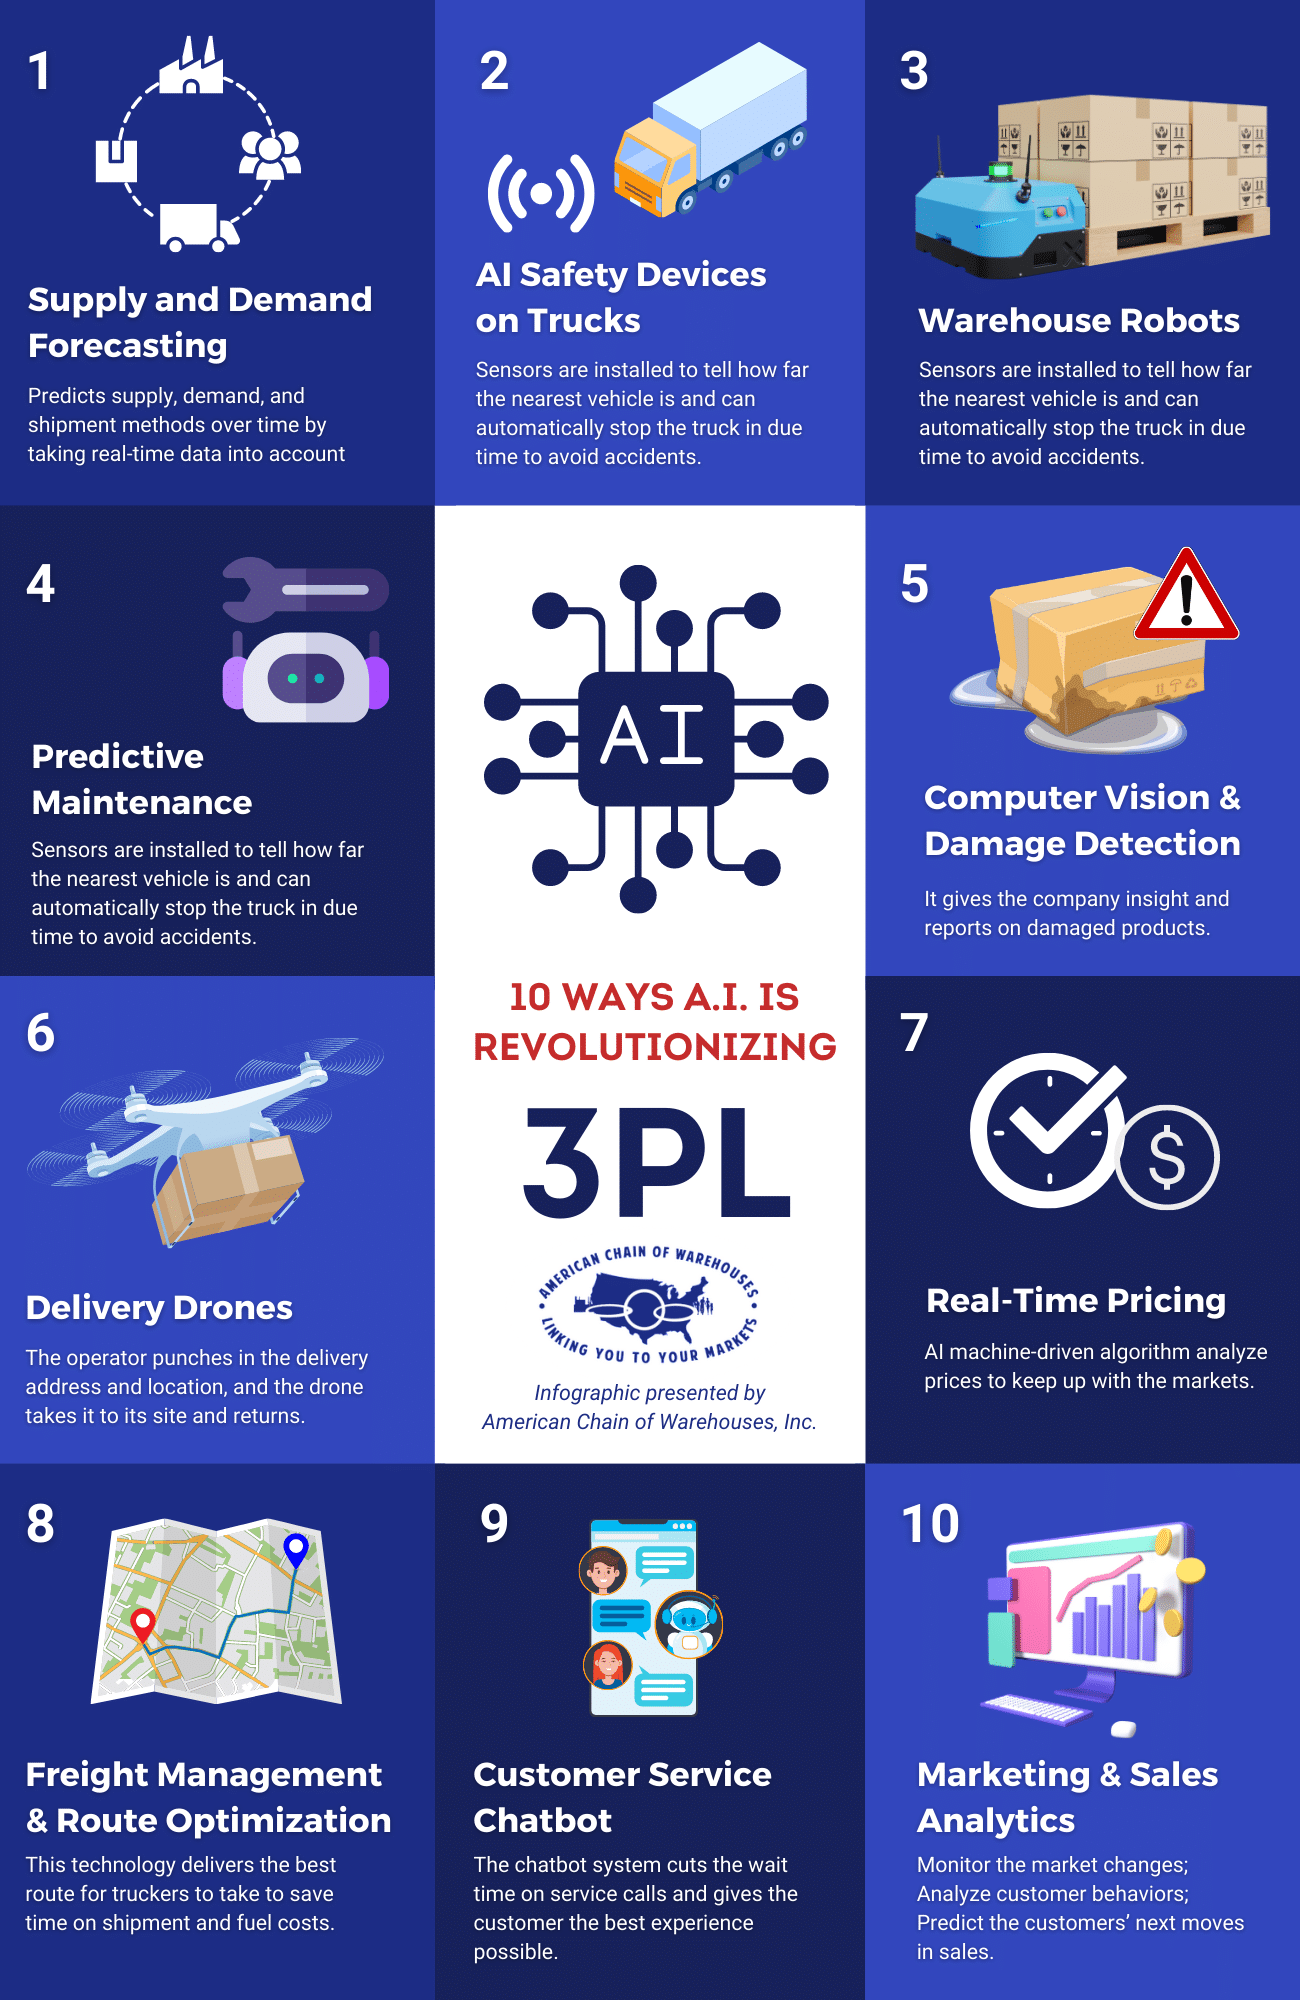 Top 10 Ways Artificial Intelligence Is Revolutionizing 3PL